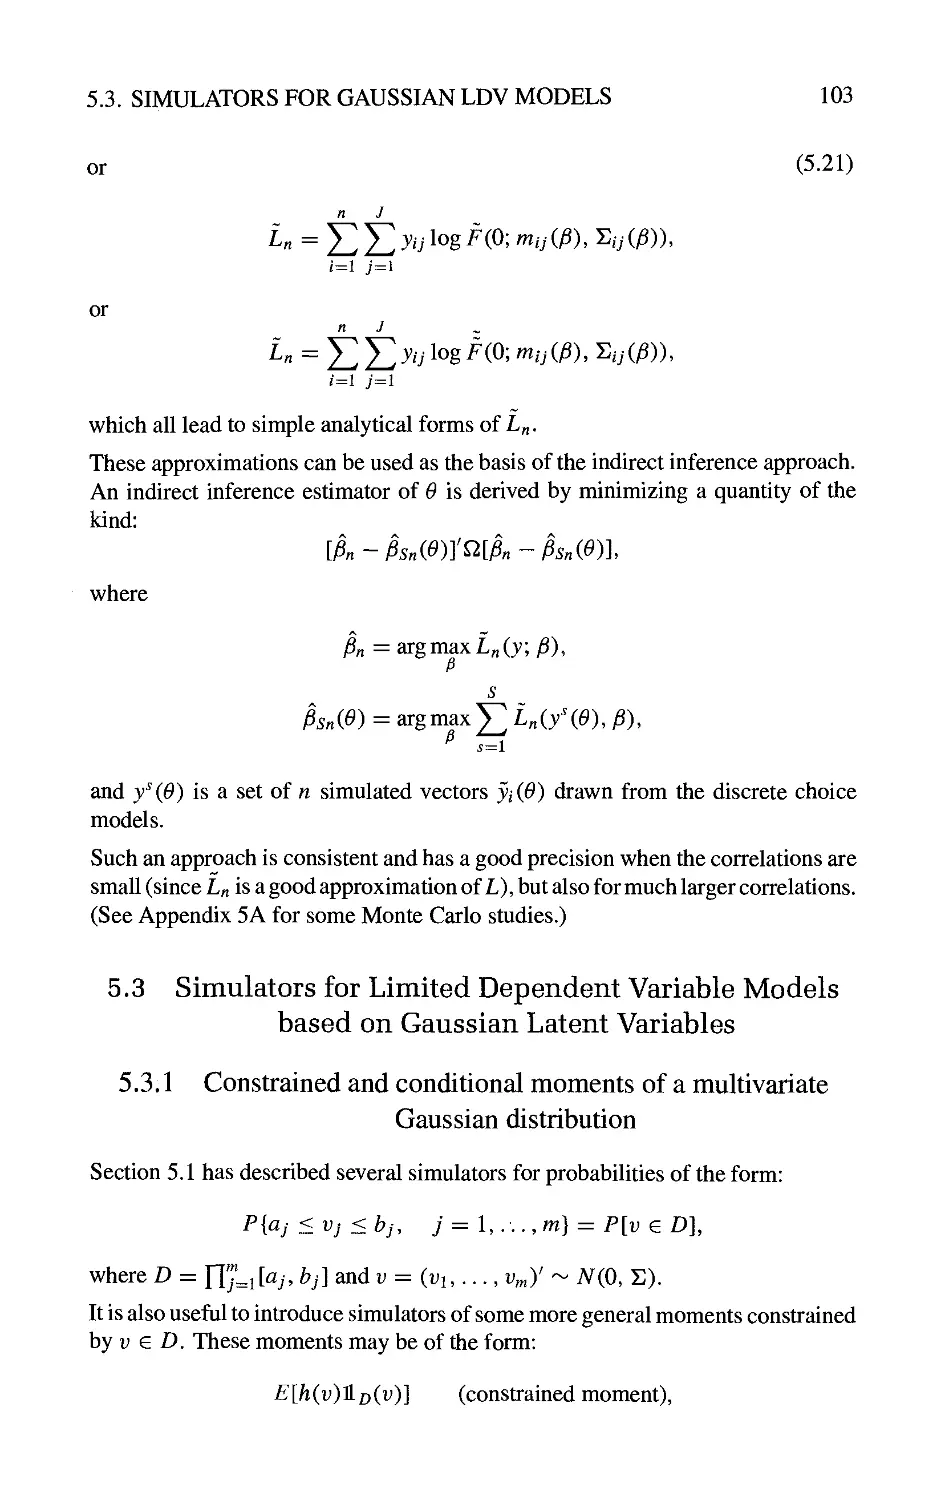 5.3 Simulators for Limited Dependent Variable Models based on Gaussian Latent Variables